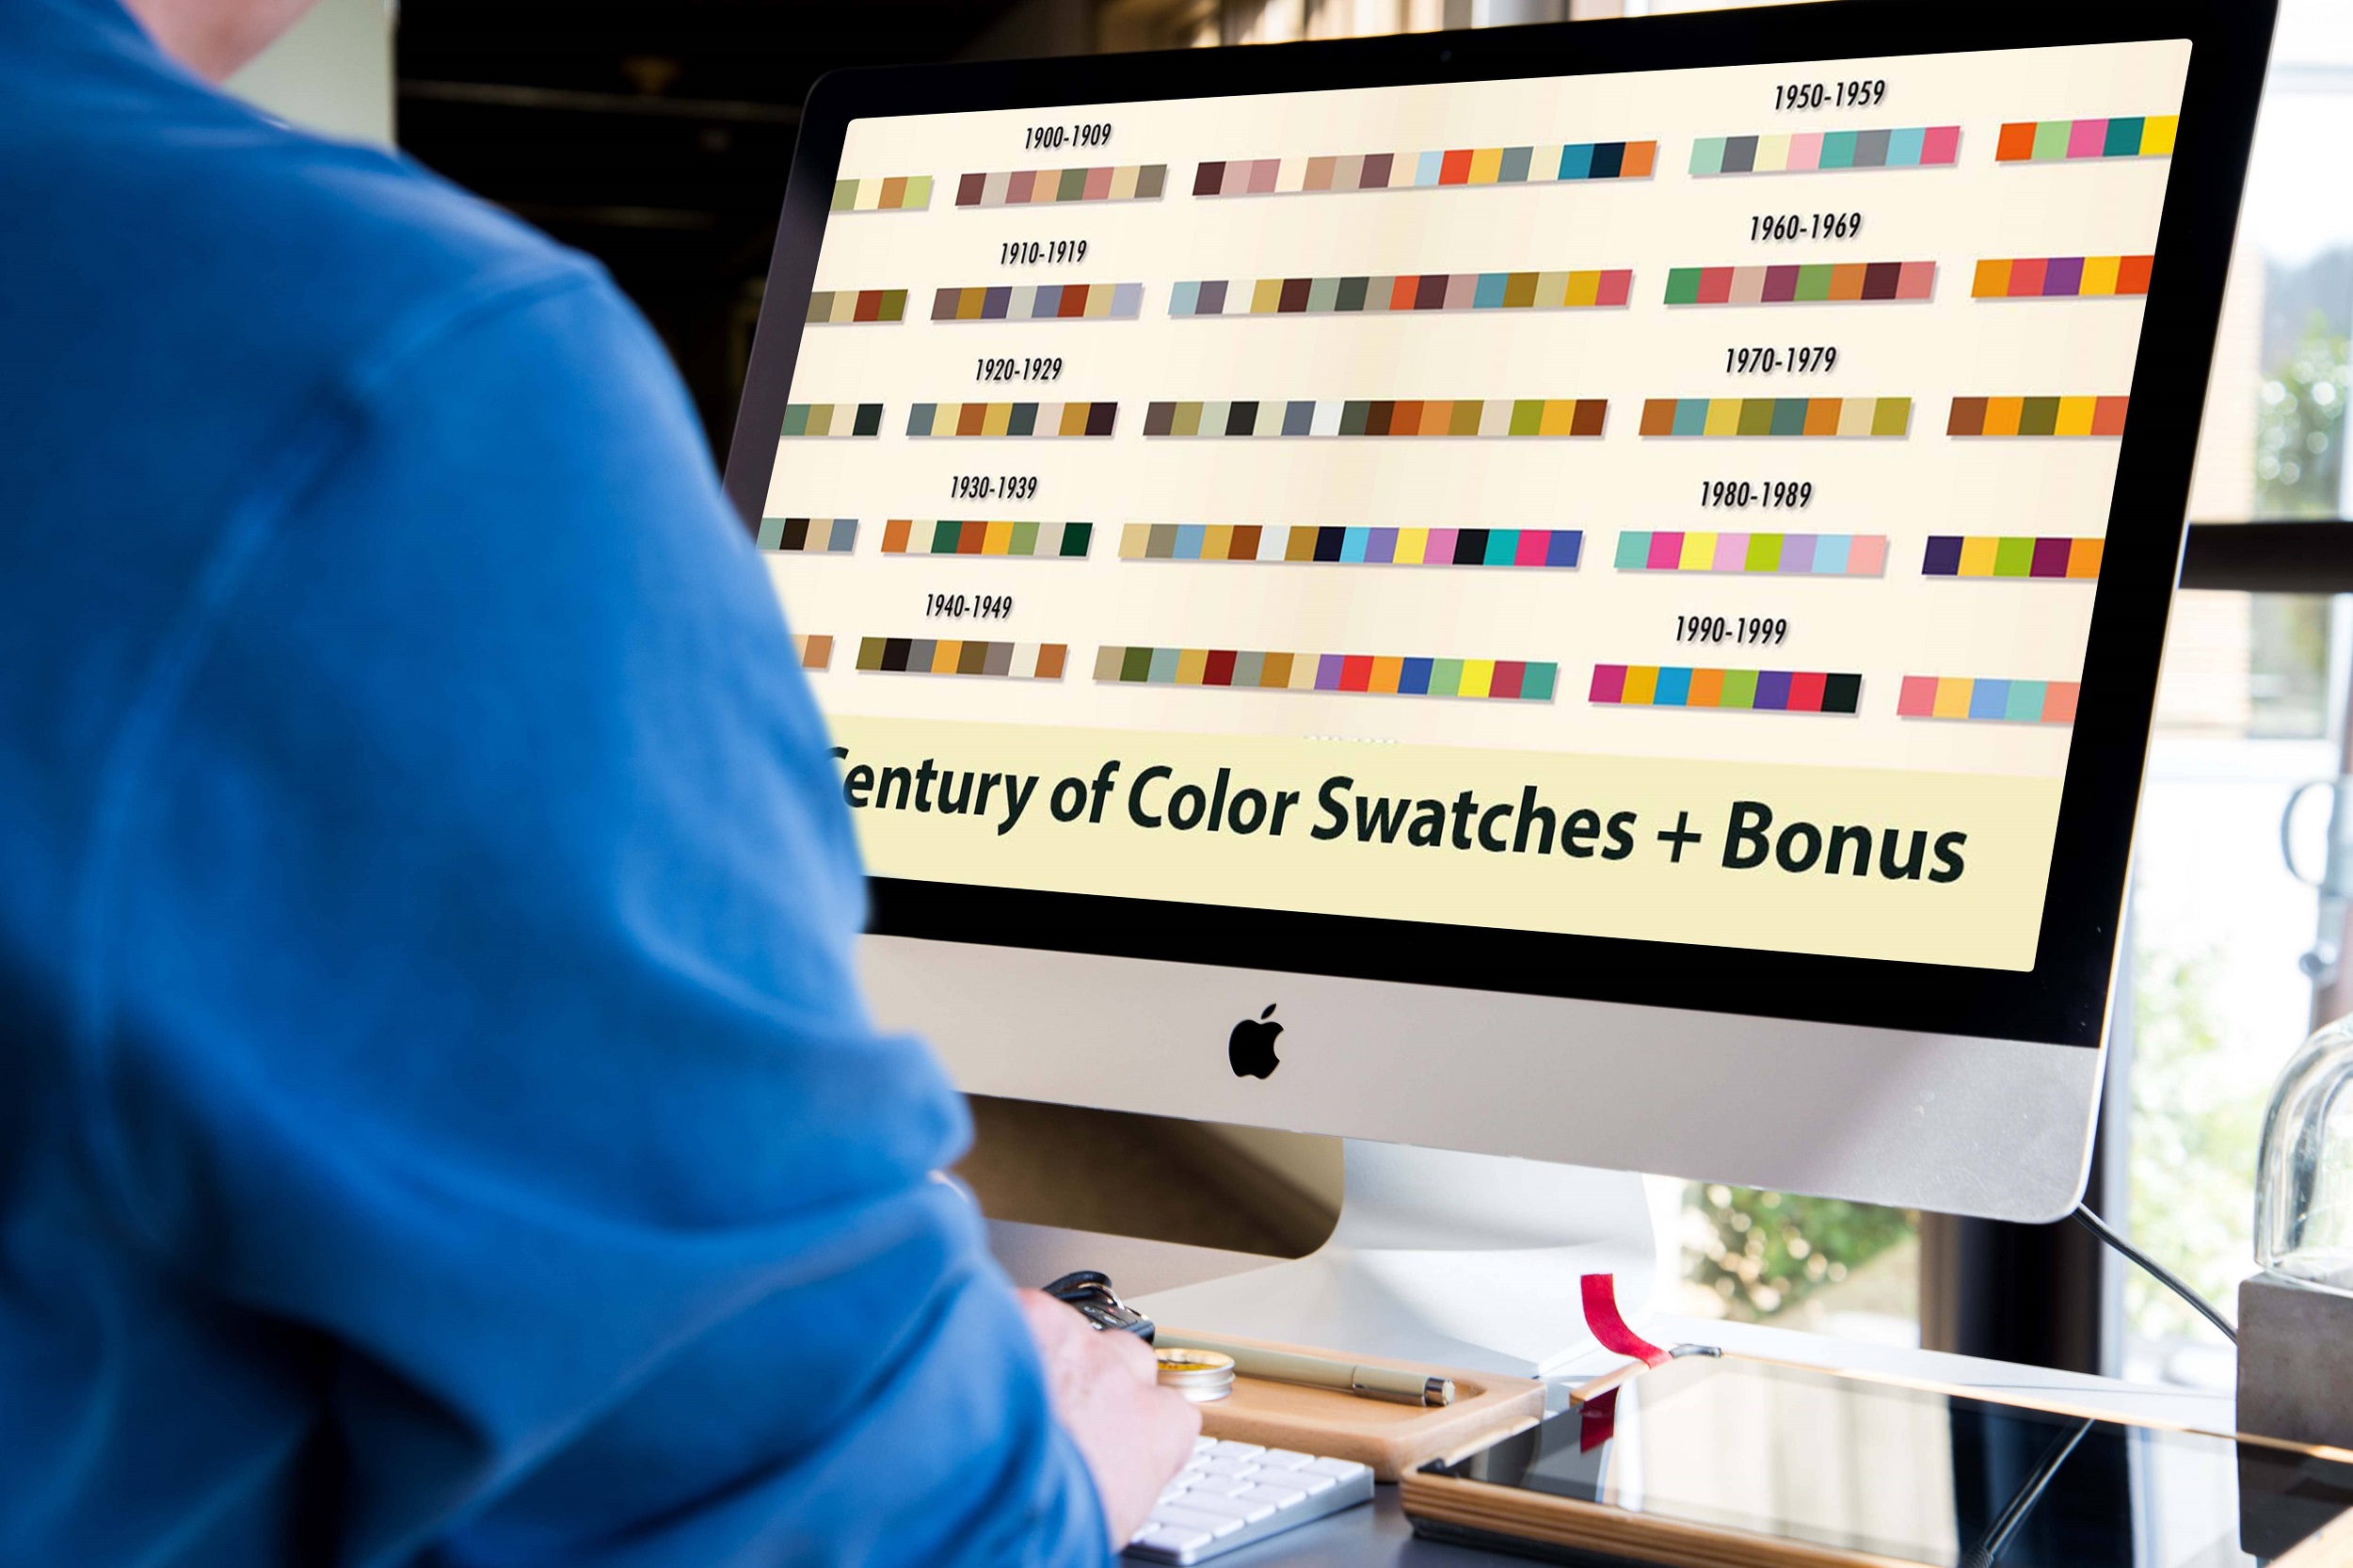 A Century of Color Swatches mockup computer.